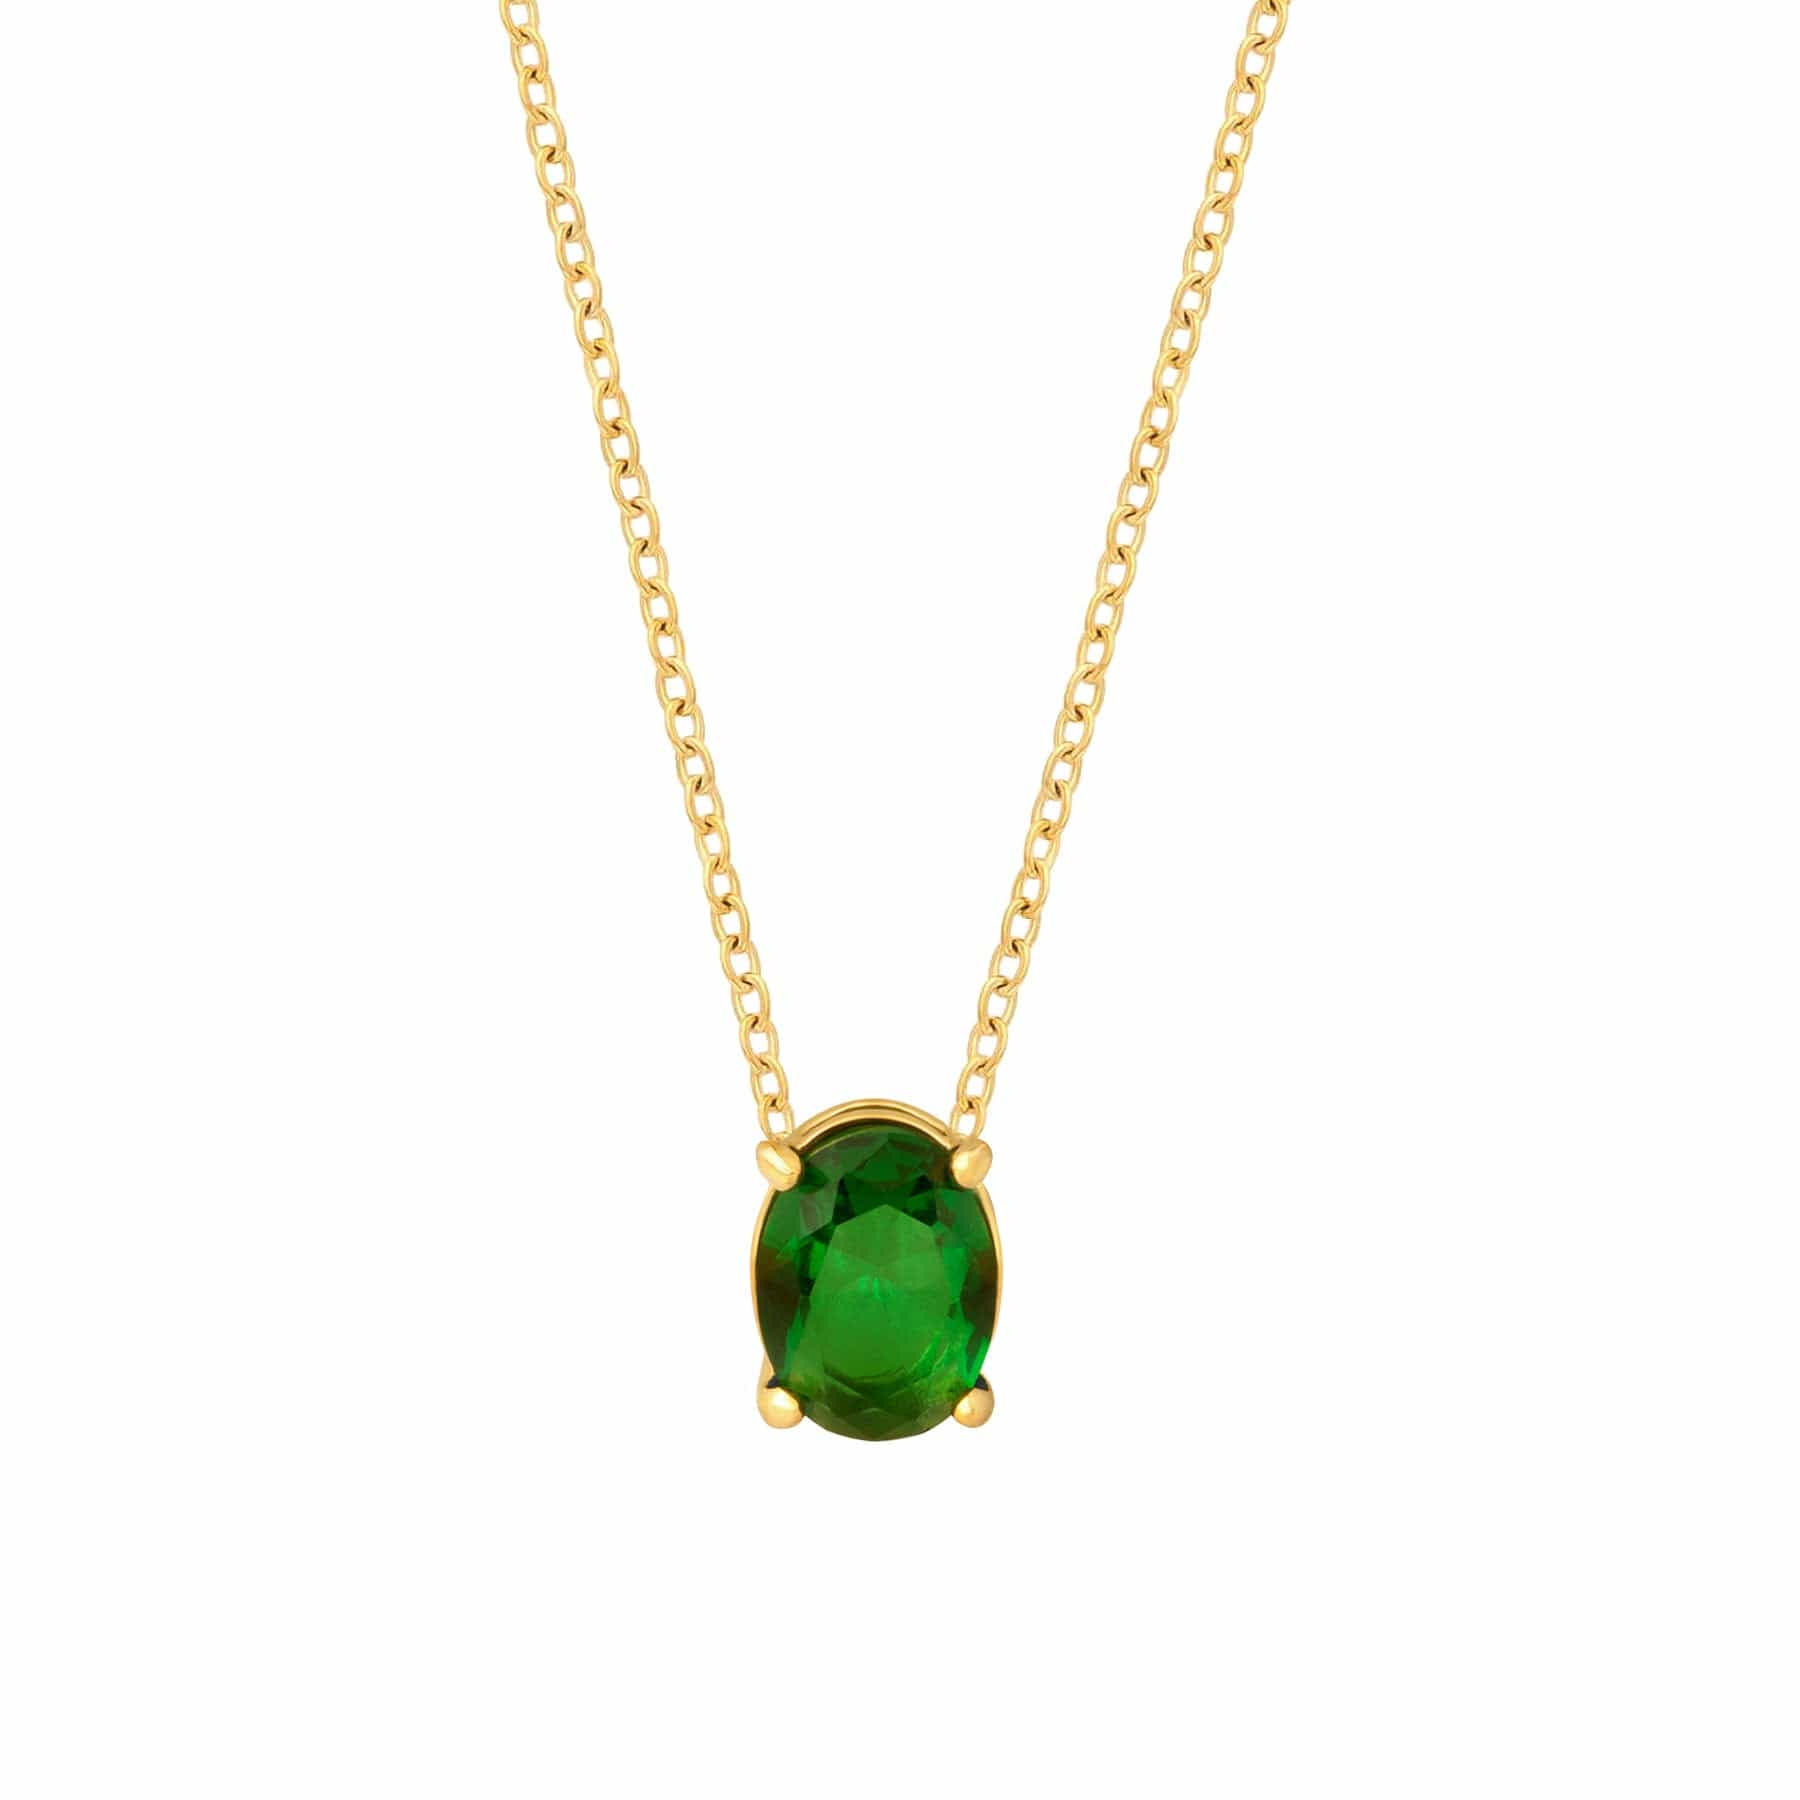 BohoMoon Stainless Steel Maia Necklace Gold / Green